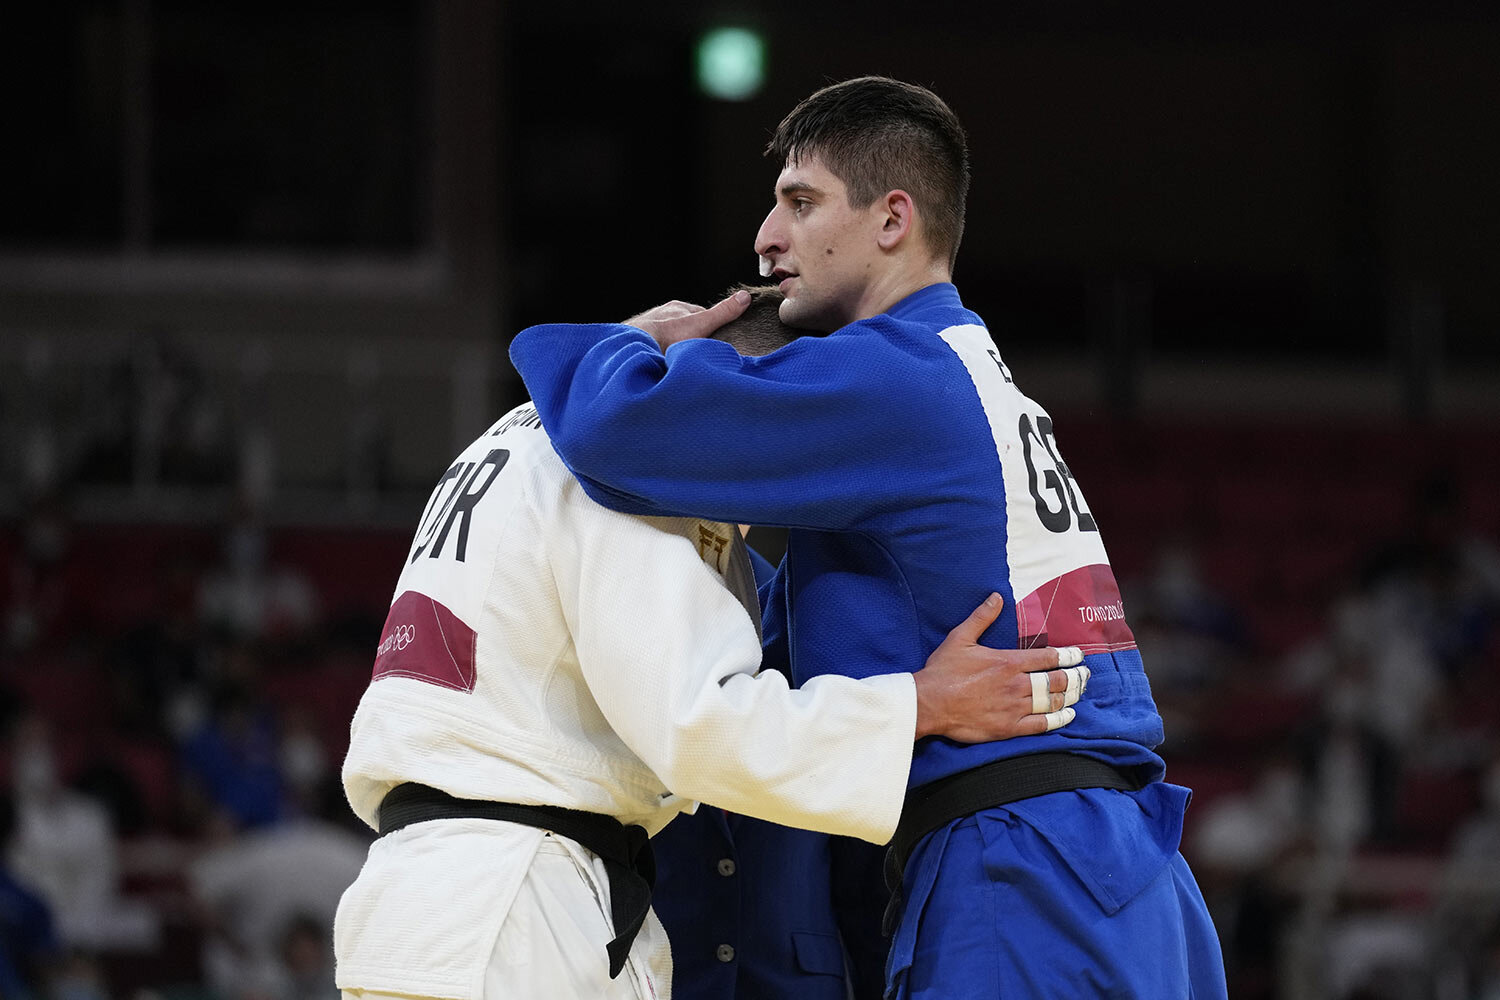  Eduard Trippel of Germany, right comforts Michael Zgank of Turkey after winning their men -90kg semifinal round against unseen, in the judo match at the 2020 Summer Olympics in Tokyo, Japan, Wednesday, July 28, 2021. (AP Photo/Vincent Thian) 